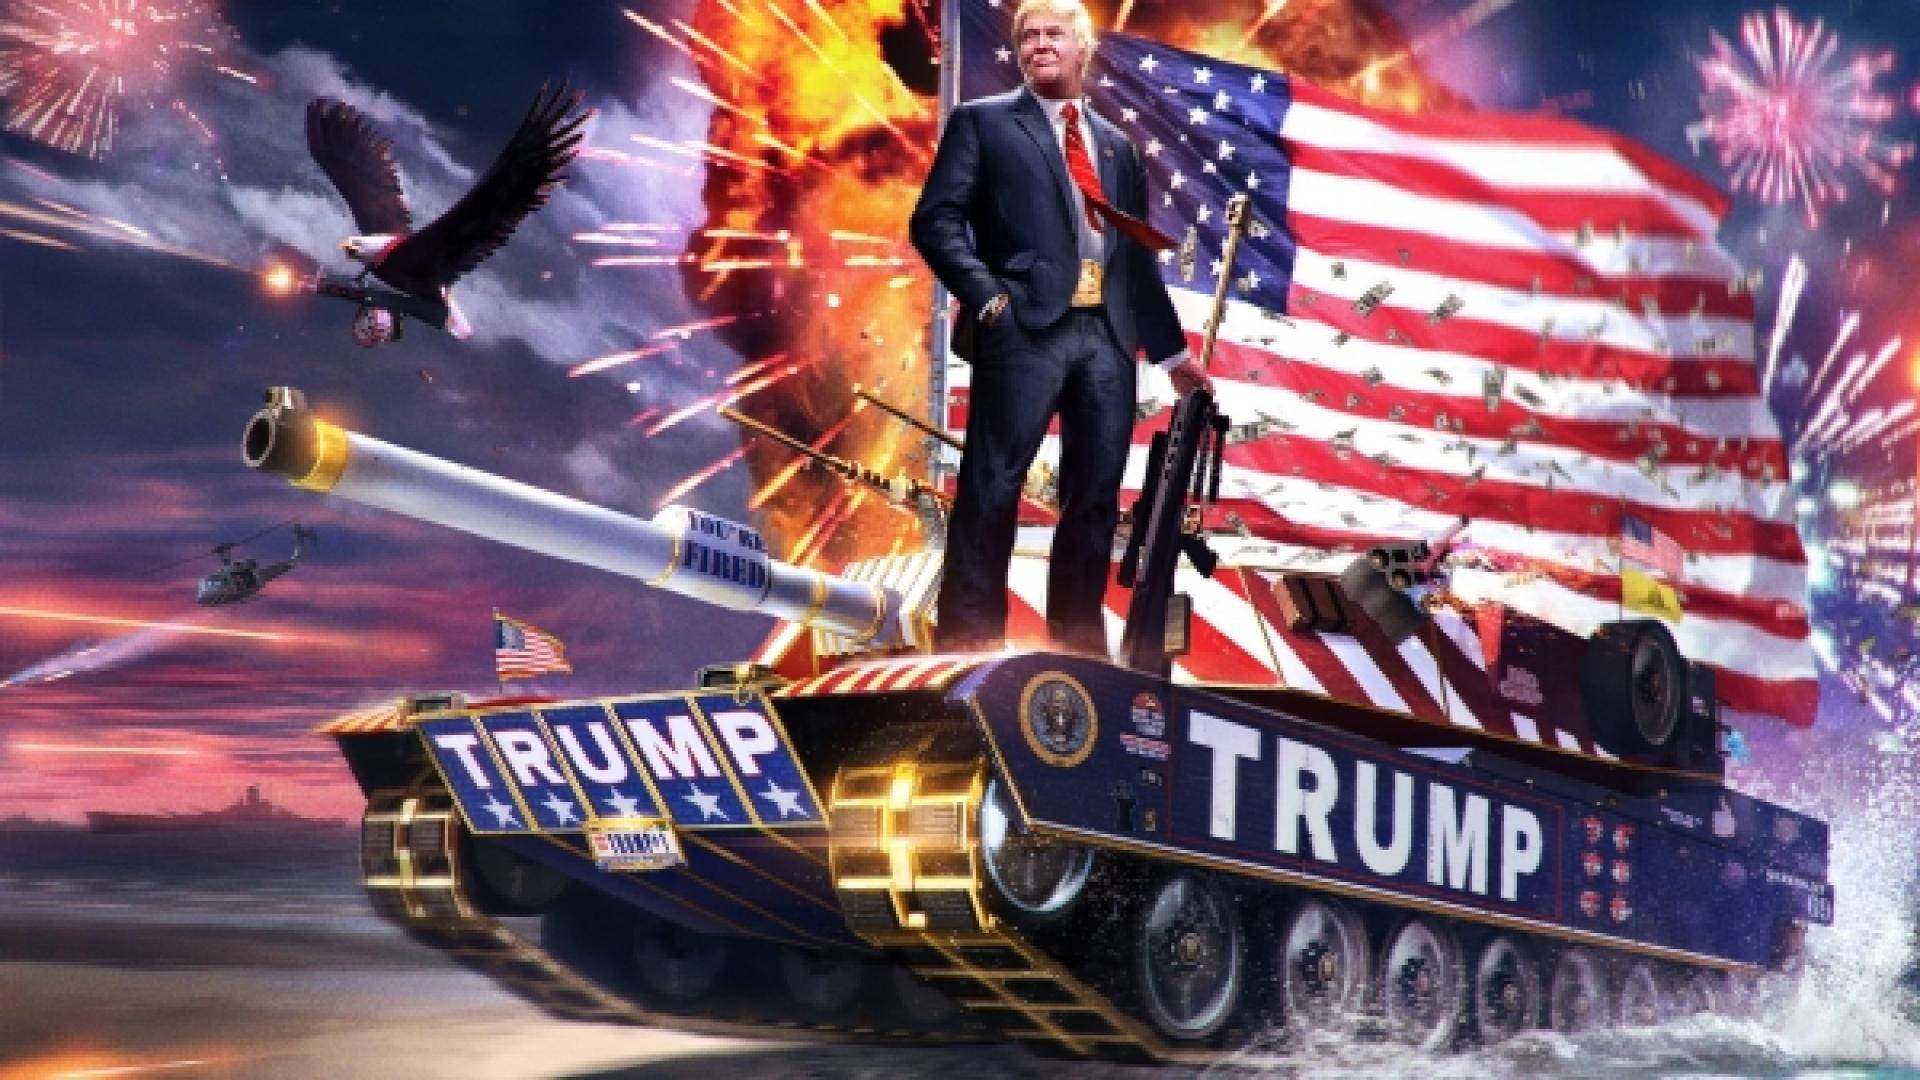 //image President Trump Riding In An Iron Man-style Tank Background